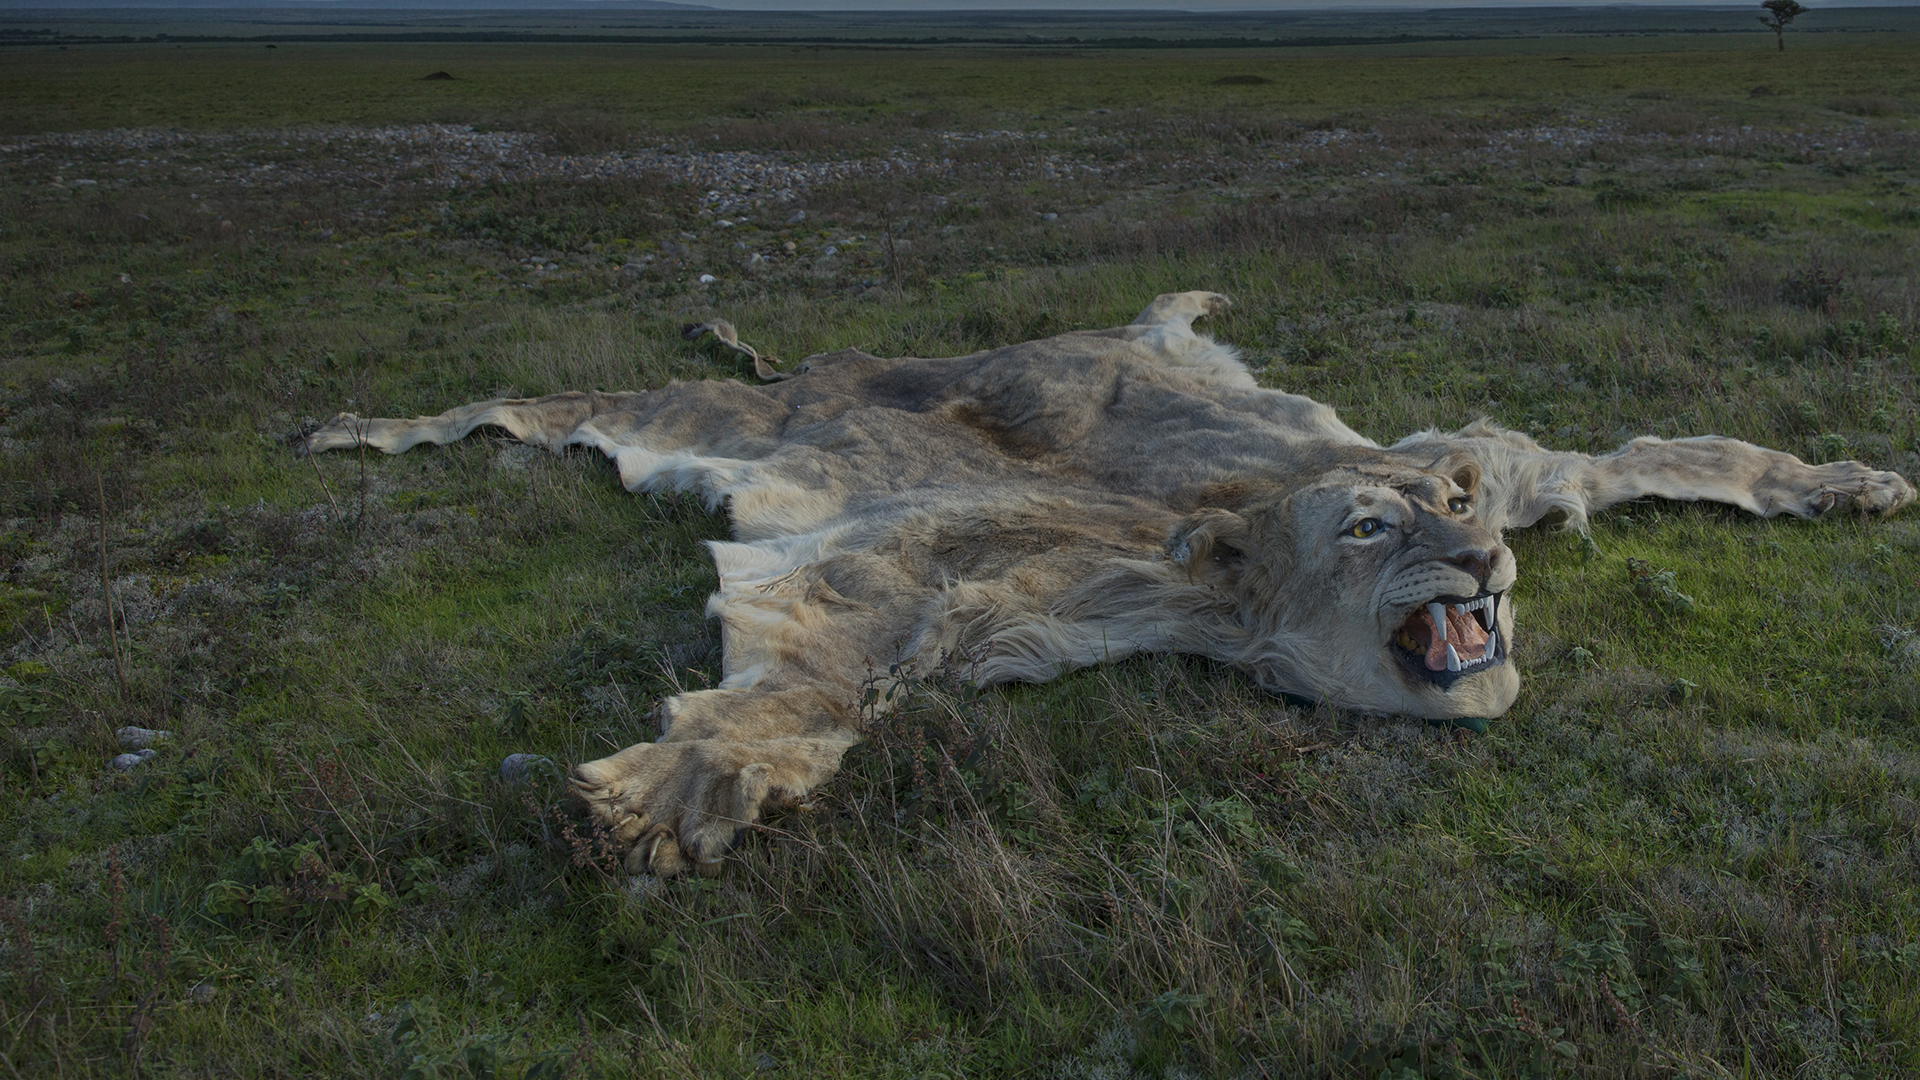 A dead lion turned into a rug is laid out on grass